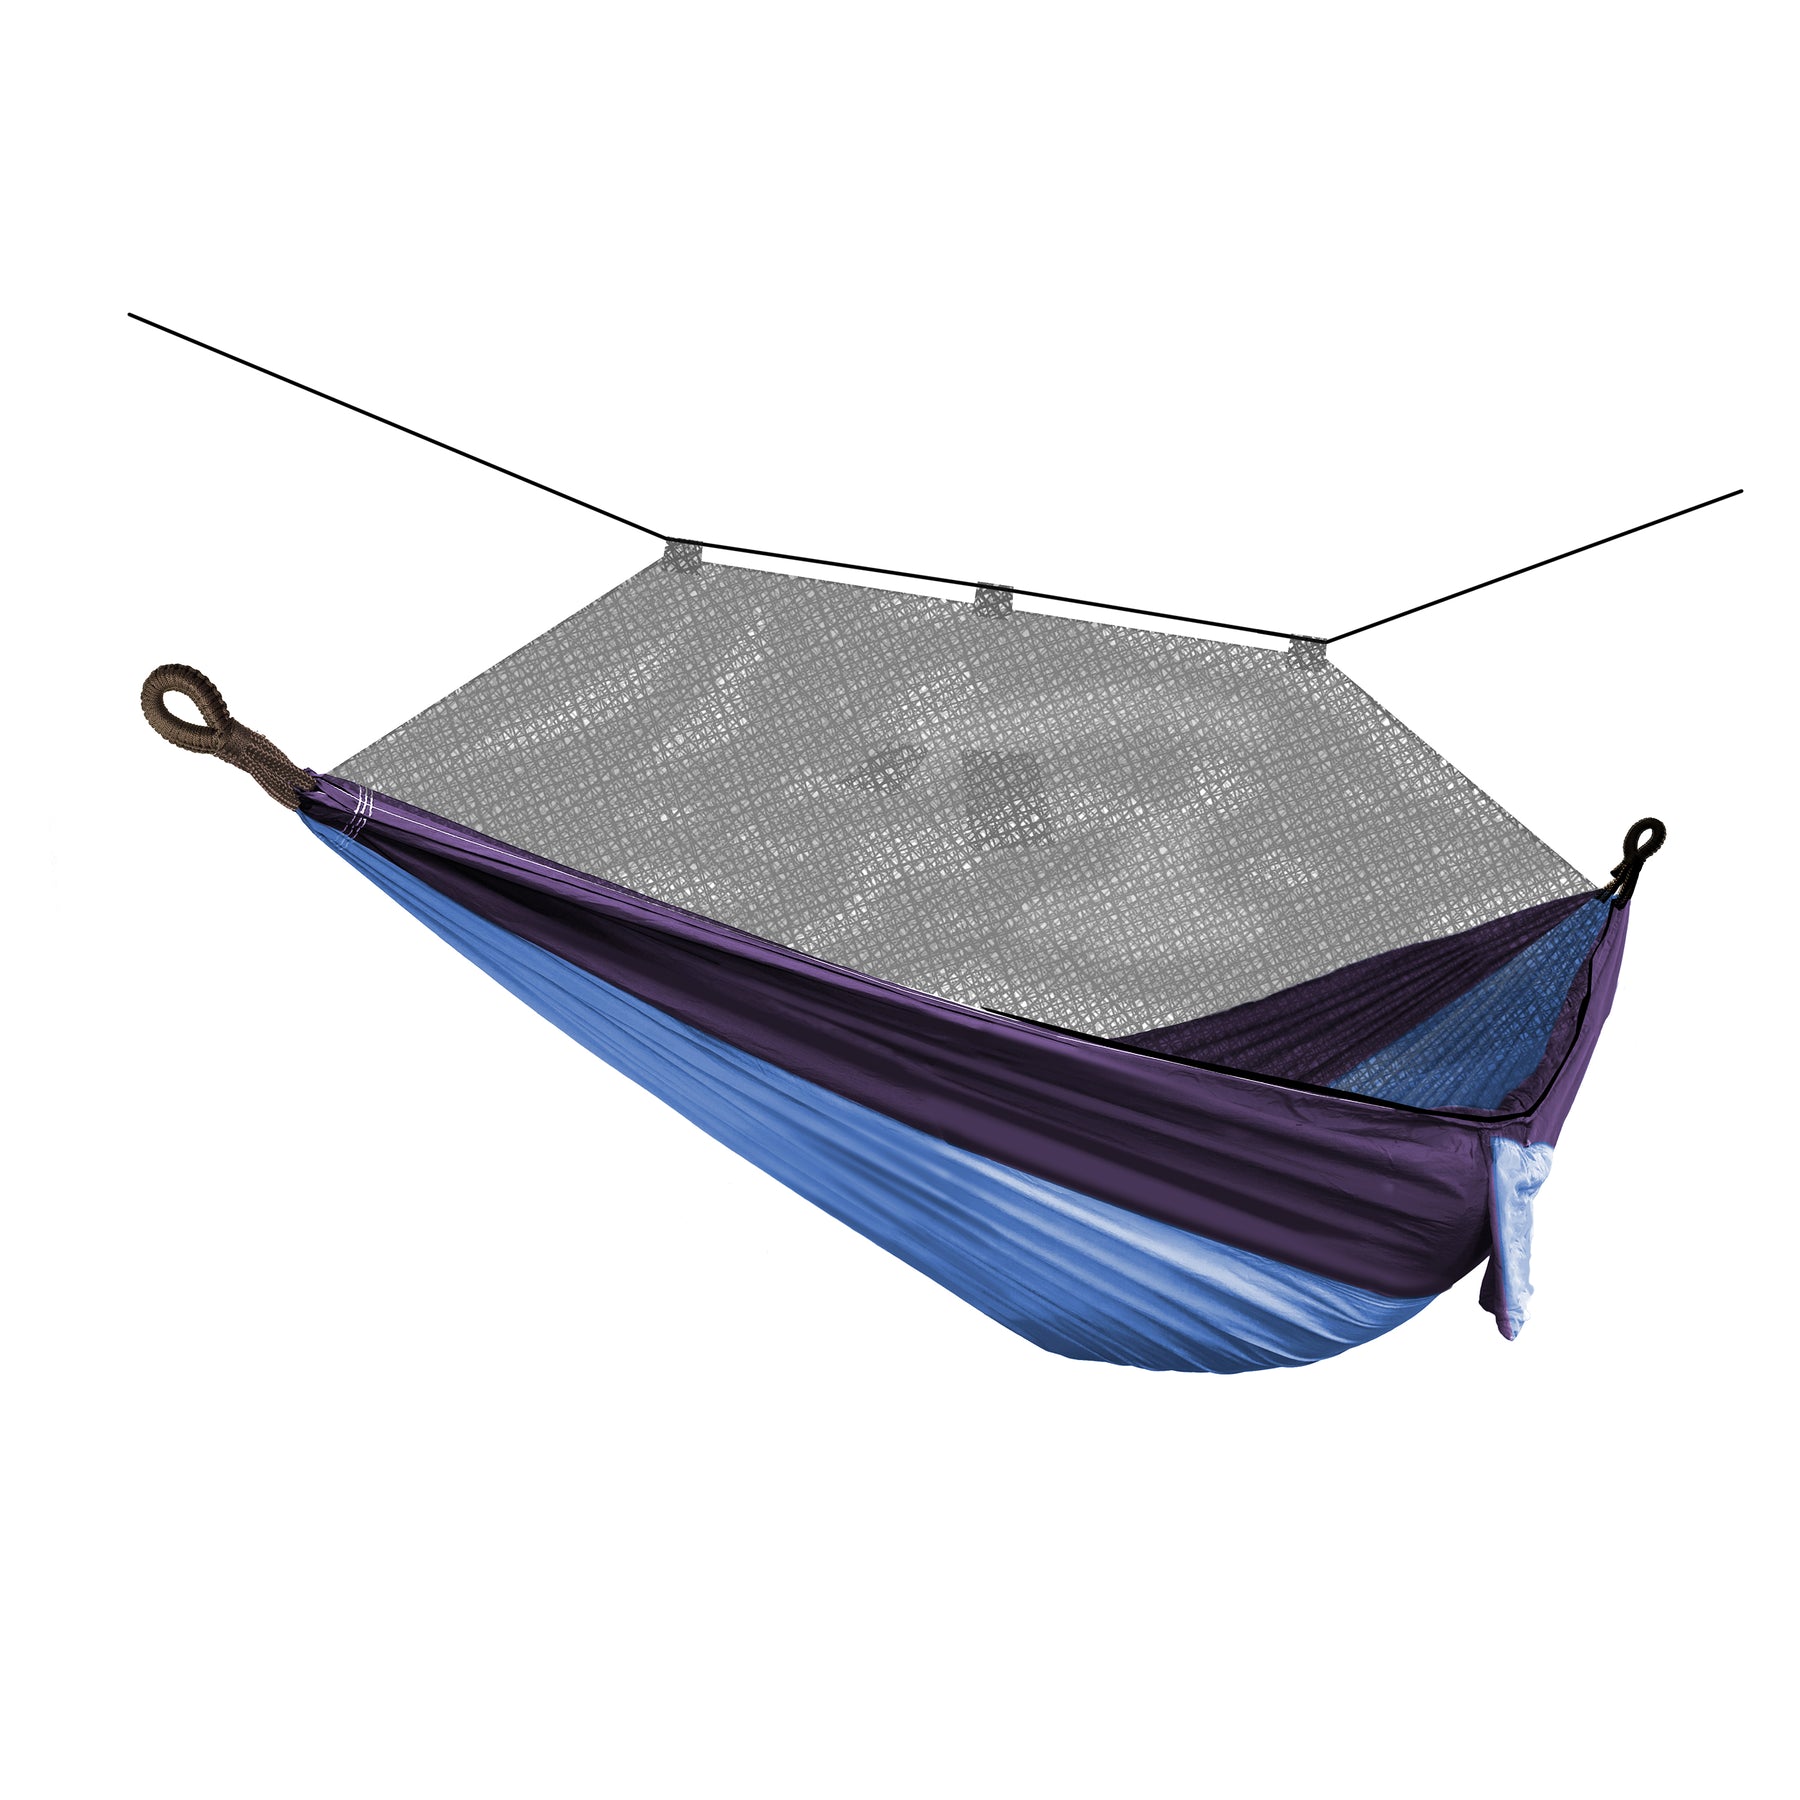 Bliss Hammocks 54-inch Wide Hammock in a Bag with mosquito net and tree straps in the royal bliss variation.